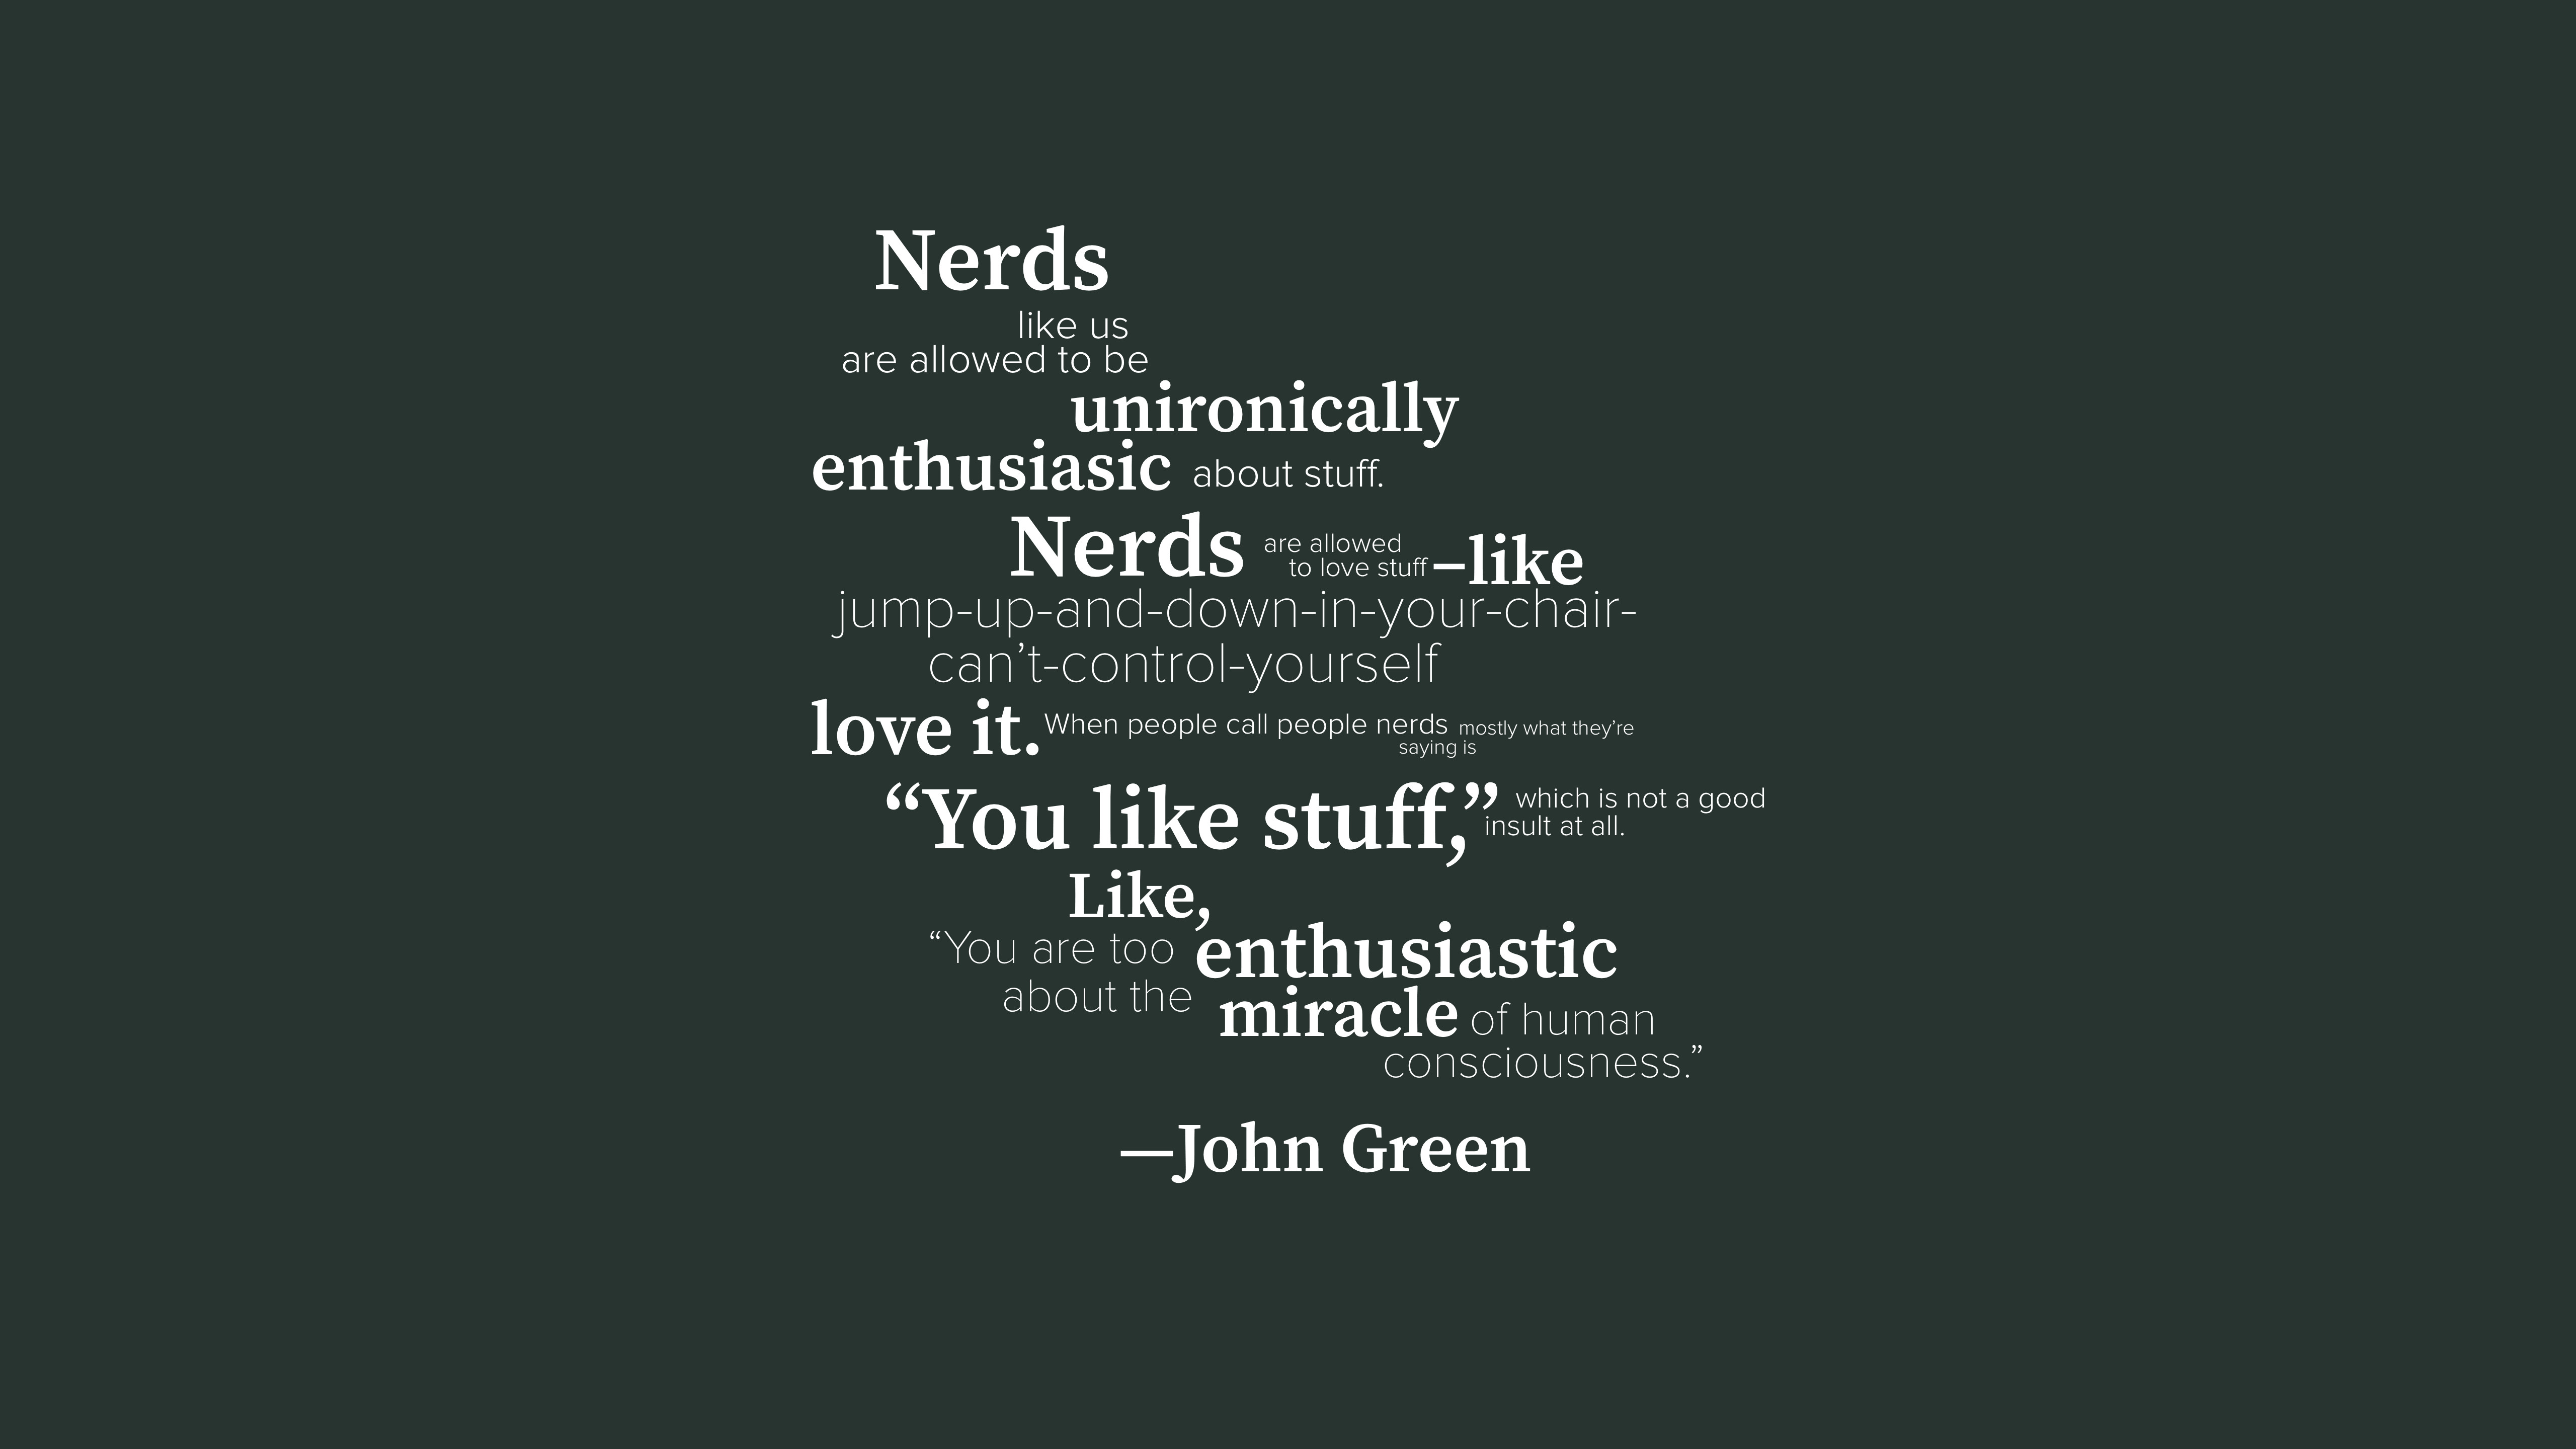 I made a wallpaper base on a quote from John Green